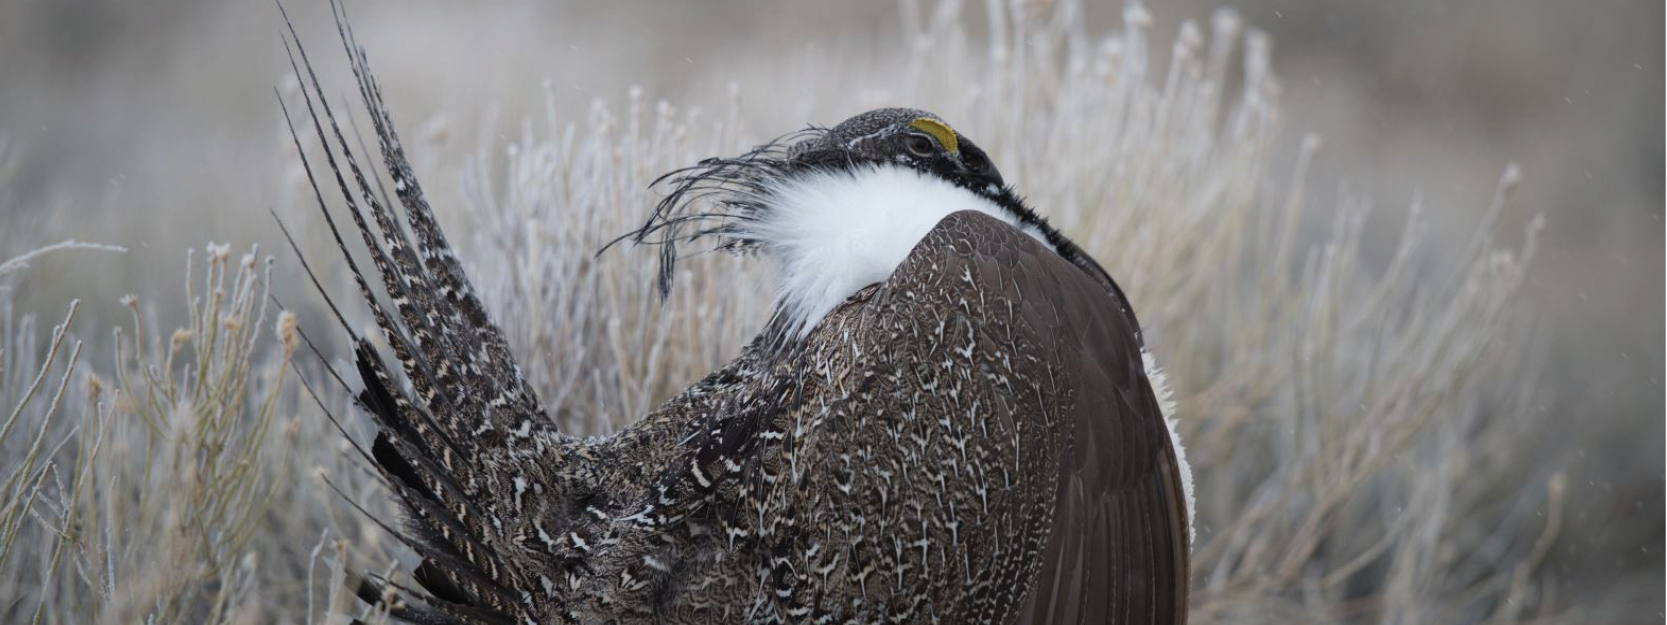 SOS: Save our sage-grouse and the places they call home